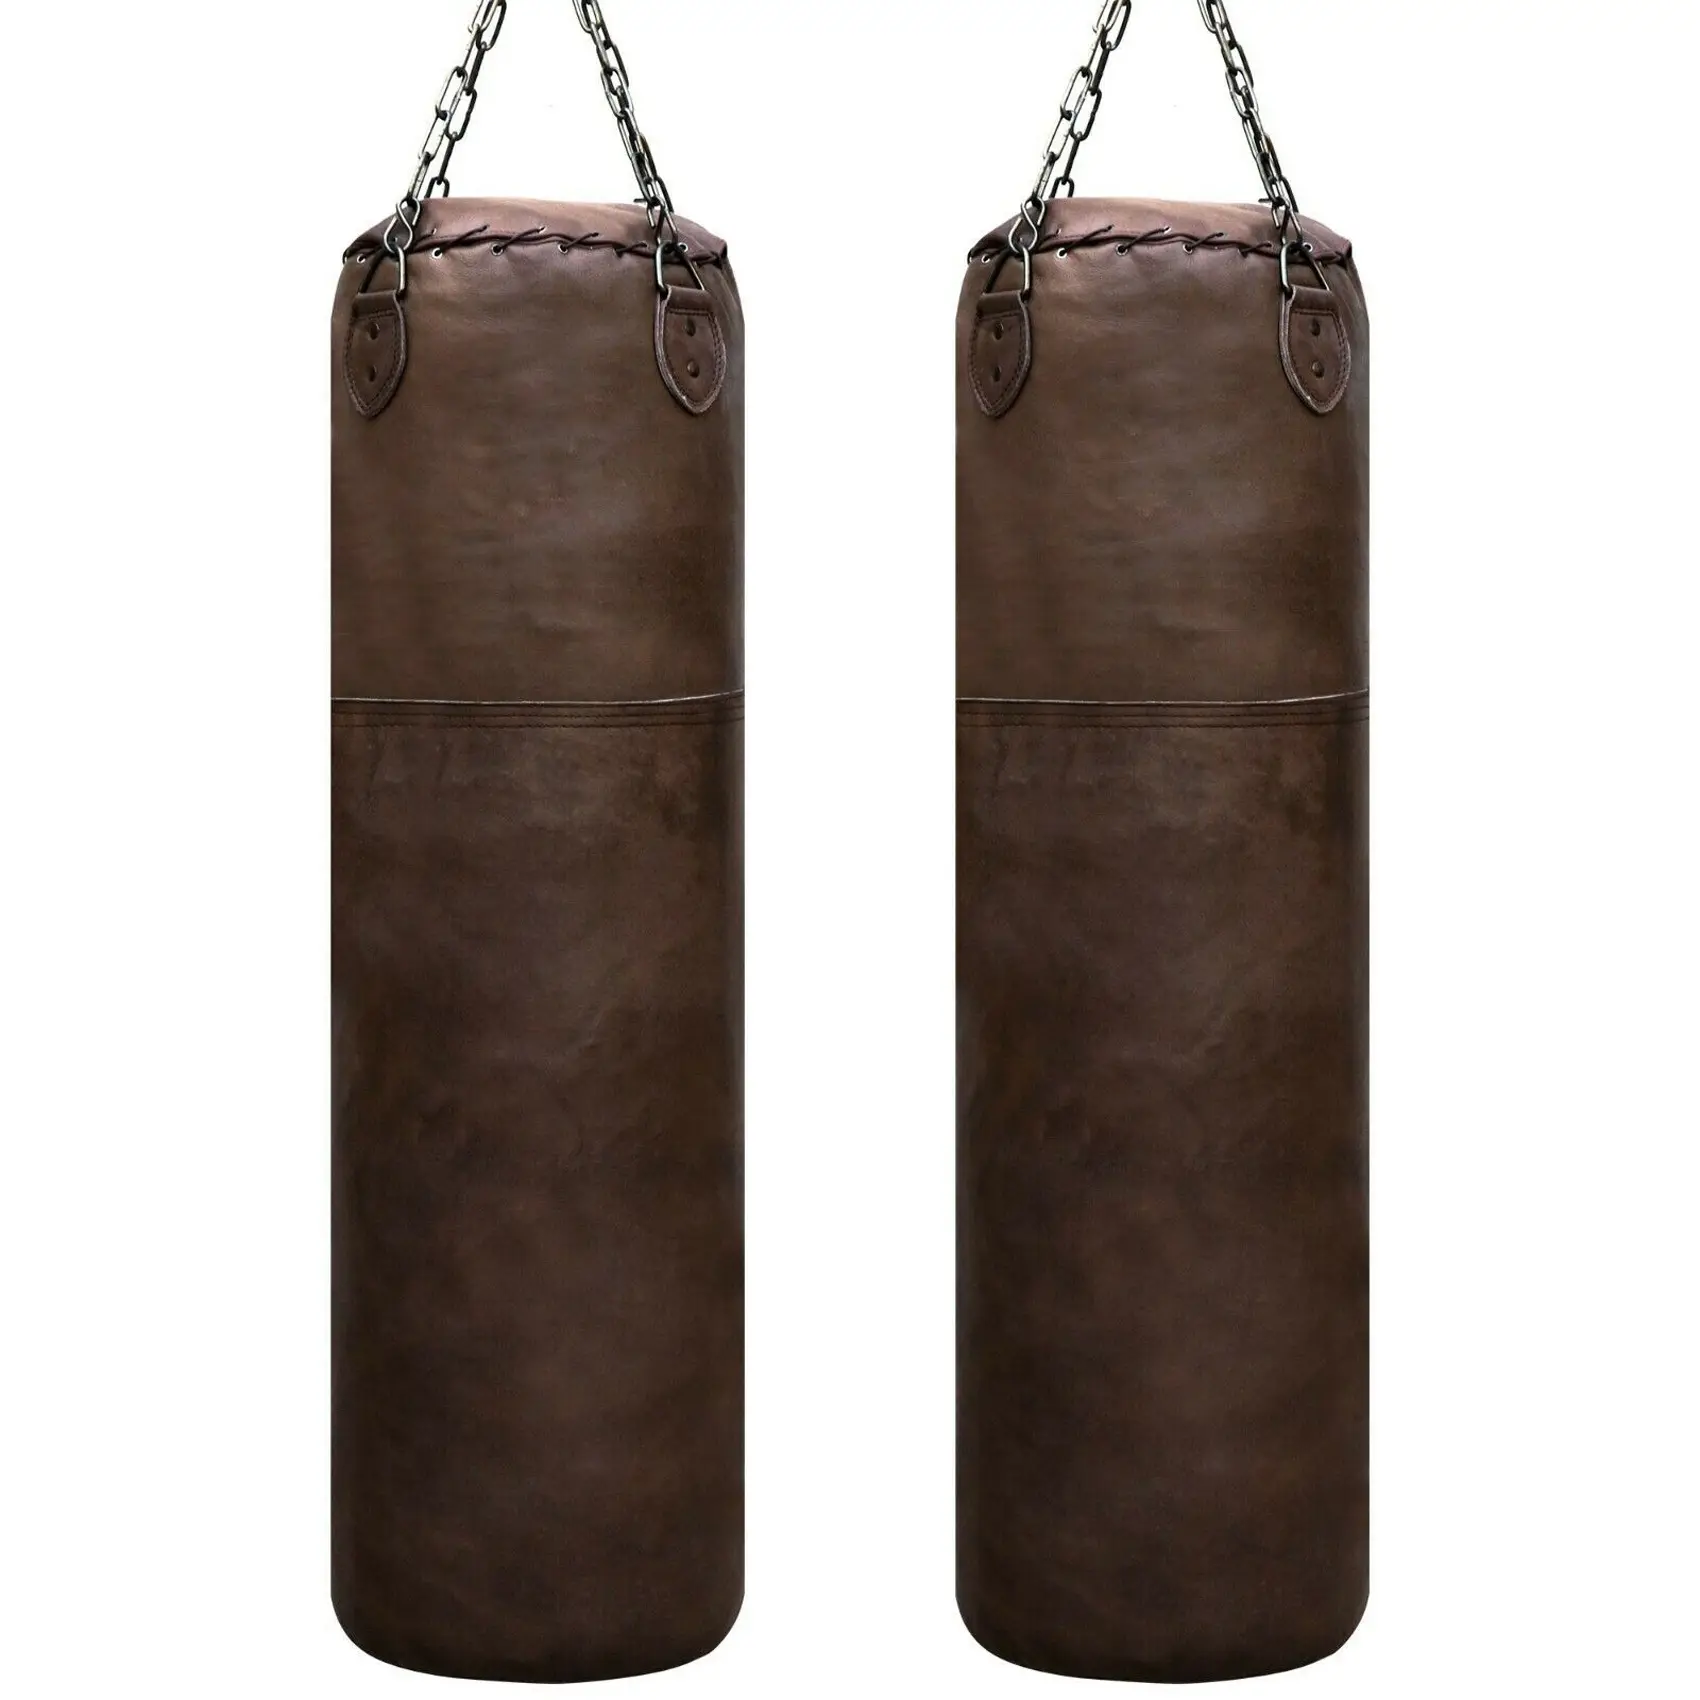 2022 New Sport Boxing Fitness with Hanging Kick Sandbag Gym Exercise Empty-heavy Boxing Bag Man Punching Bags for Adults or kids